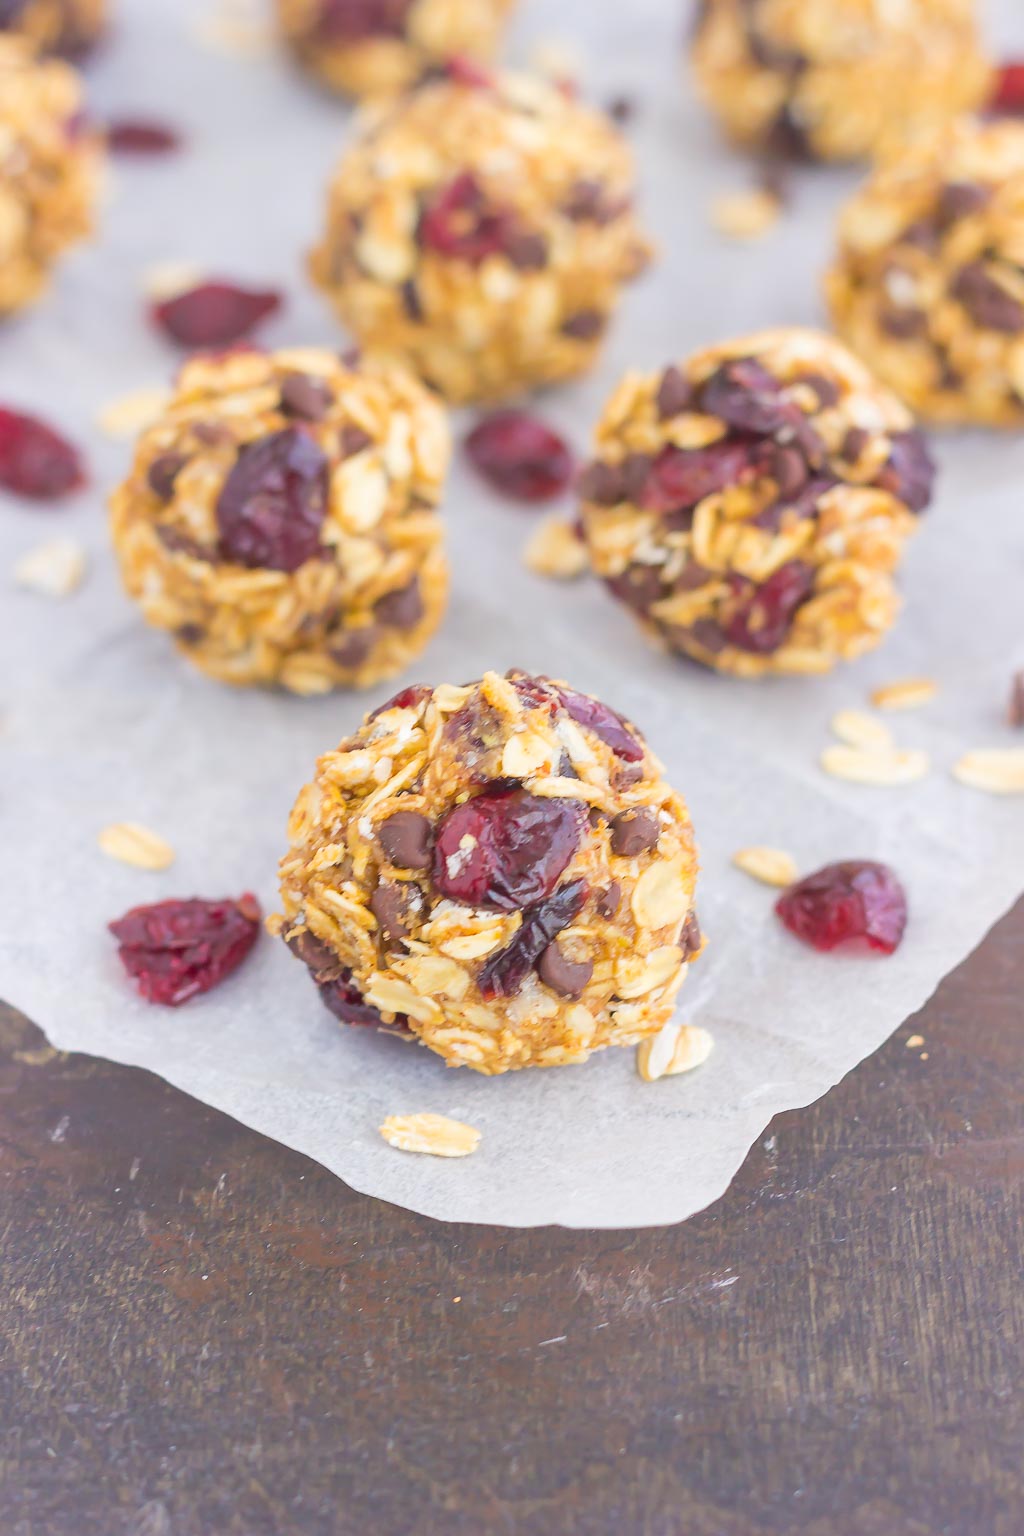 These Cherry Chocolate Chip Energy Bites are a simple, no-bake treat, filled with healthier ingredients and loaded with flavor. Perfect for a quick breakfast, snack, or even dessert, you'll be whipping up these bites all year long!